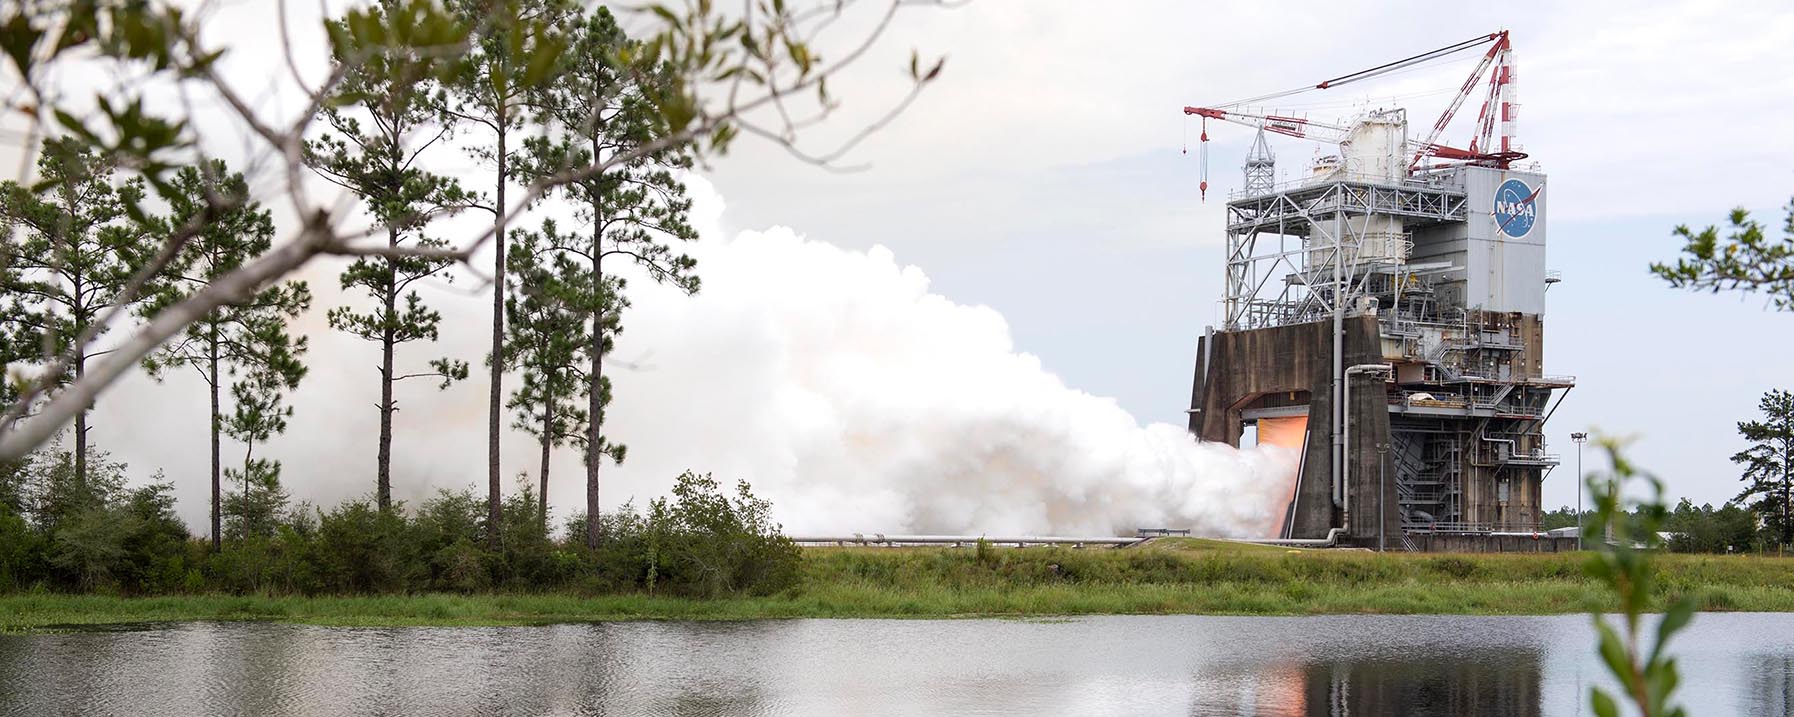 RS-25 Test at Stennis Space Center